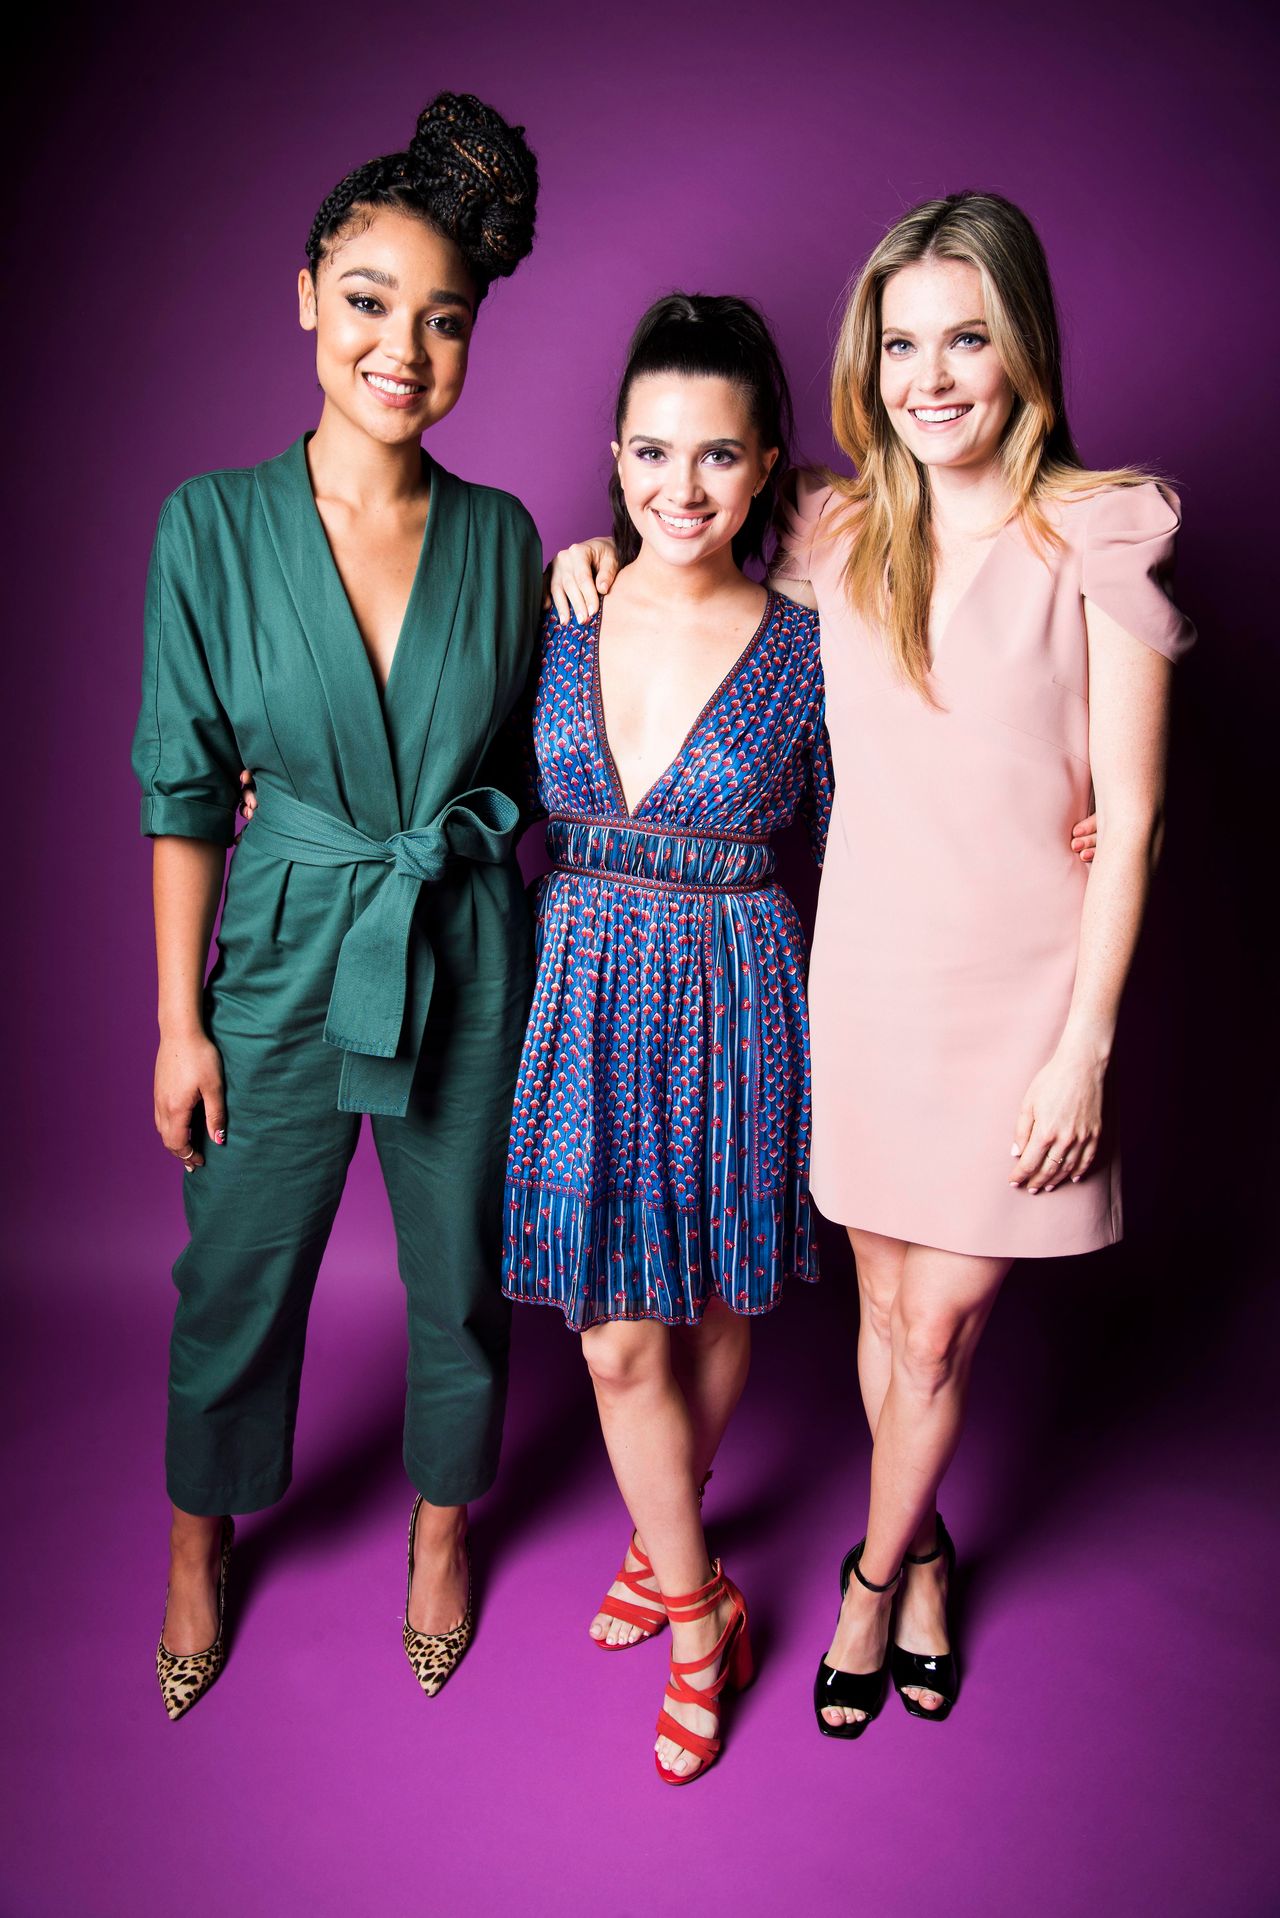 Aisha Dee, Katie Stevens and Meghann Fahy of "The Bold Type" visit HuffPost.